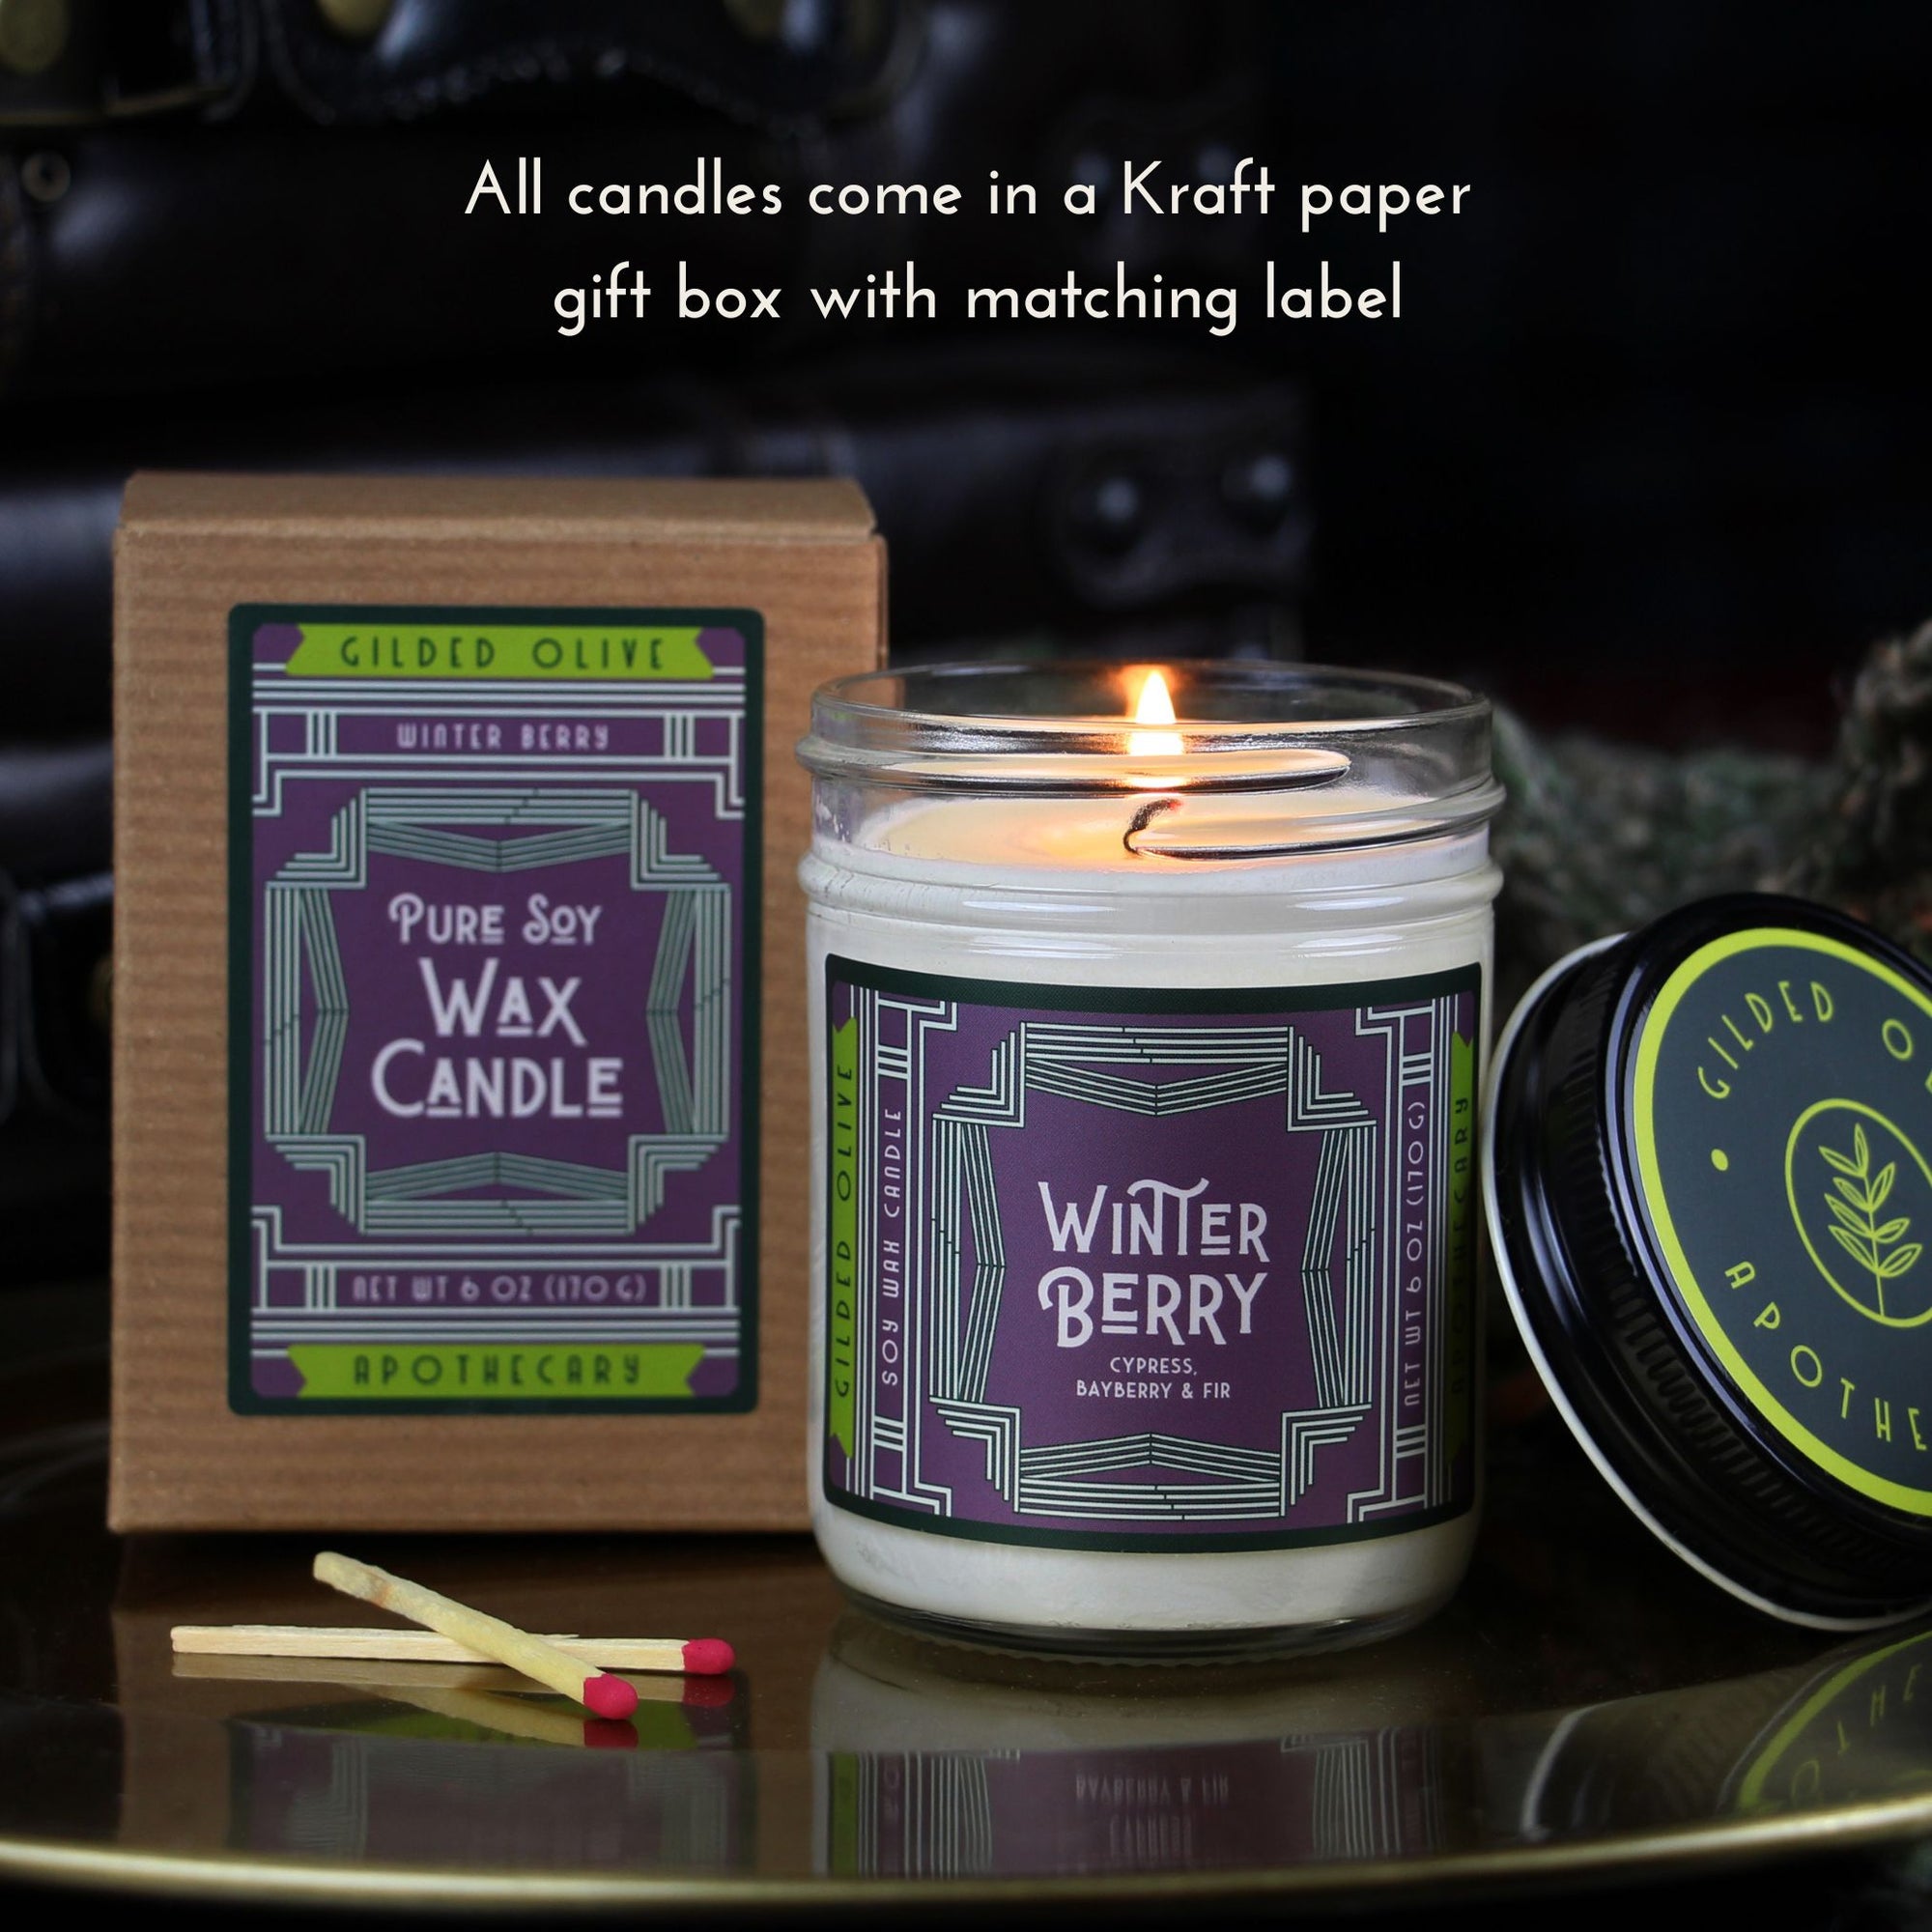 Candles come in a Kraft paper box with matching label